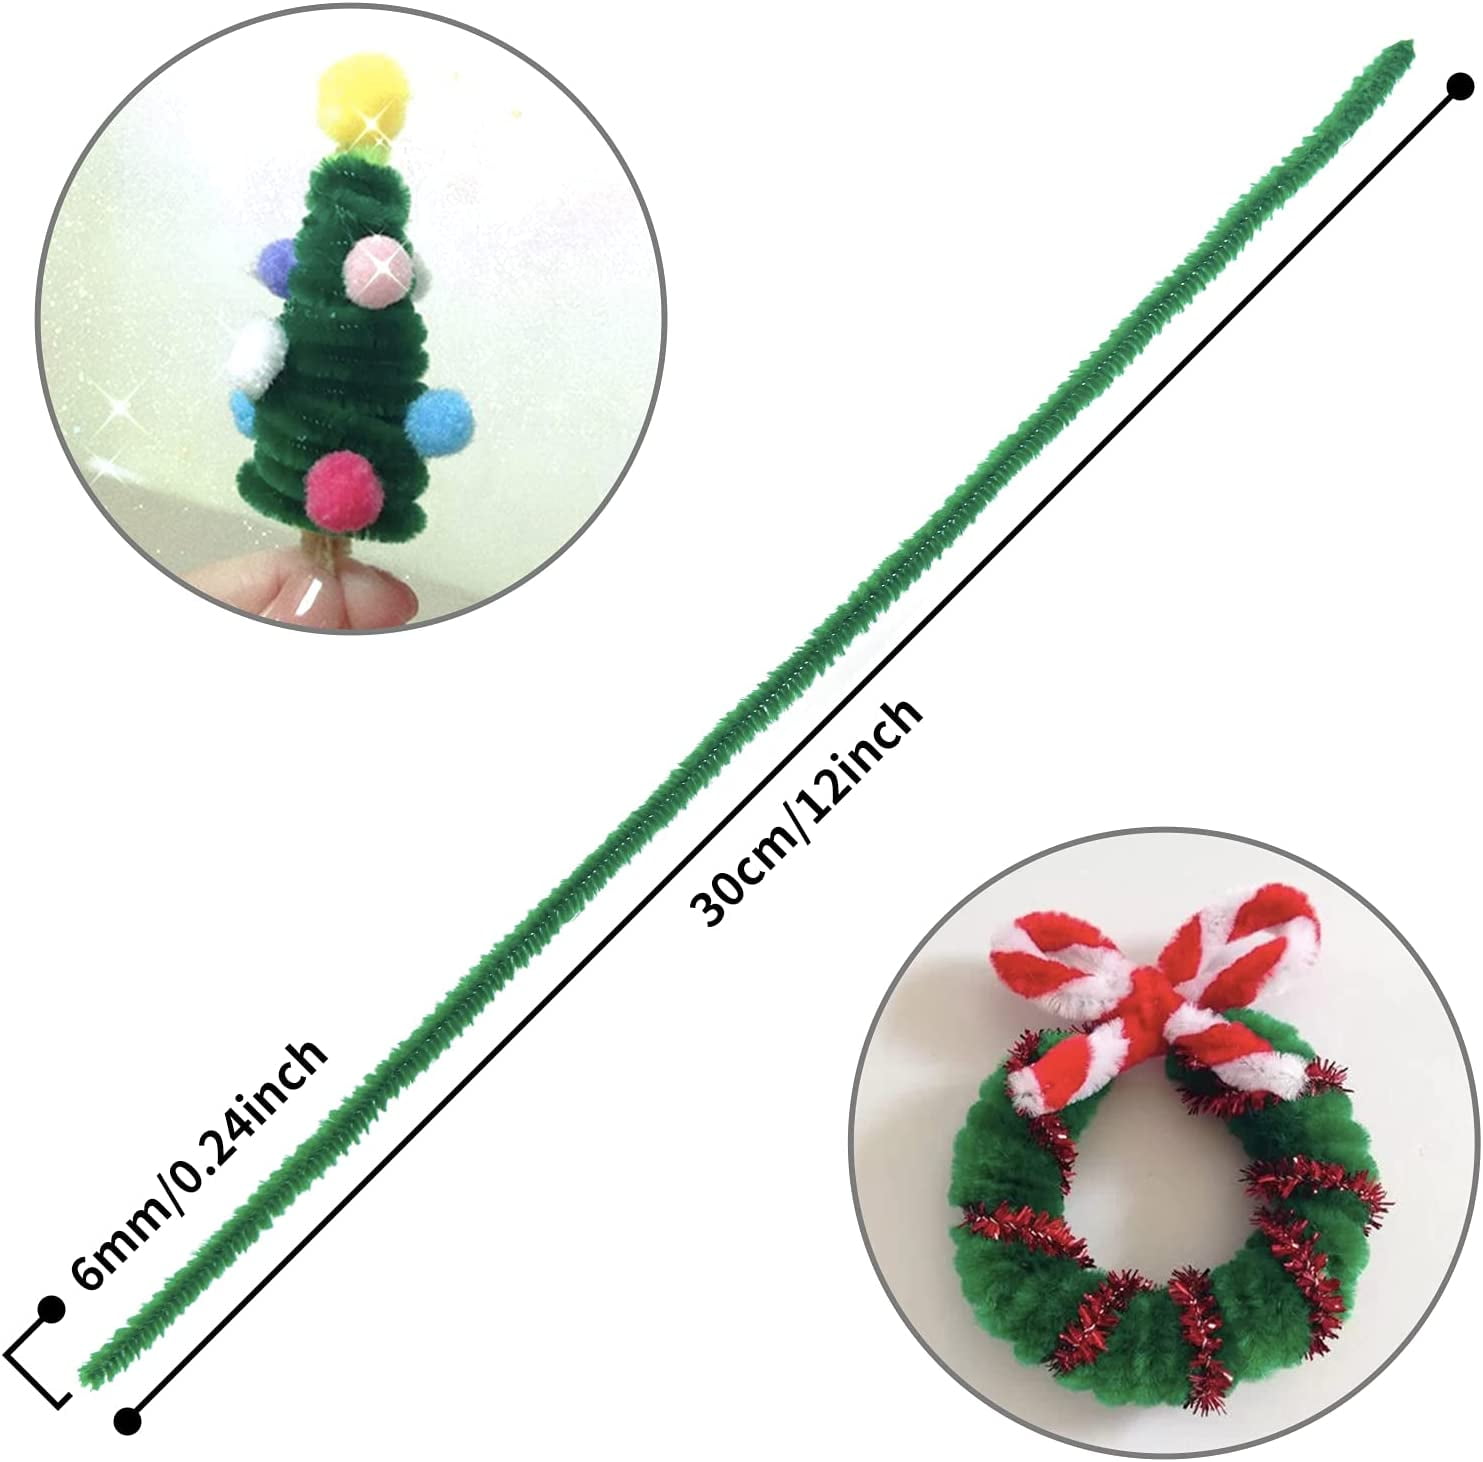 3 Packs DARICE CHENILLE STEMS Pipe Cleaners Green, Red & White 12 X 6MM  300PC